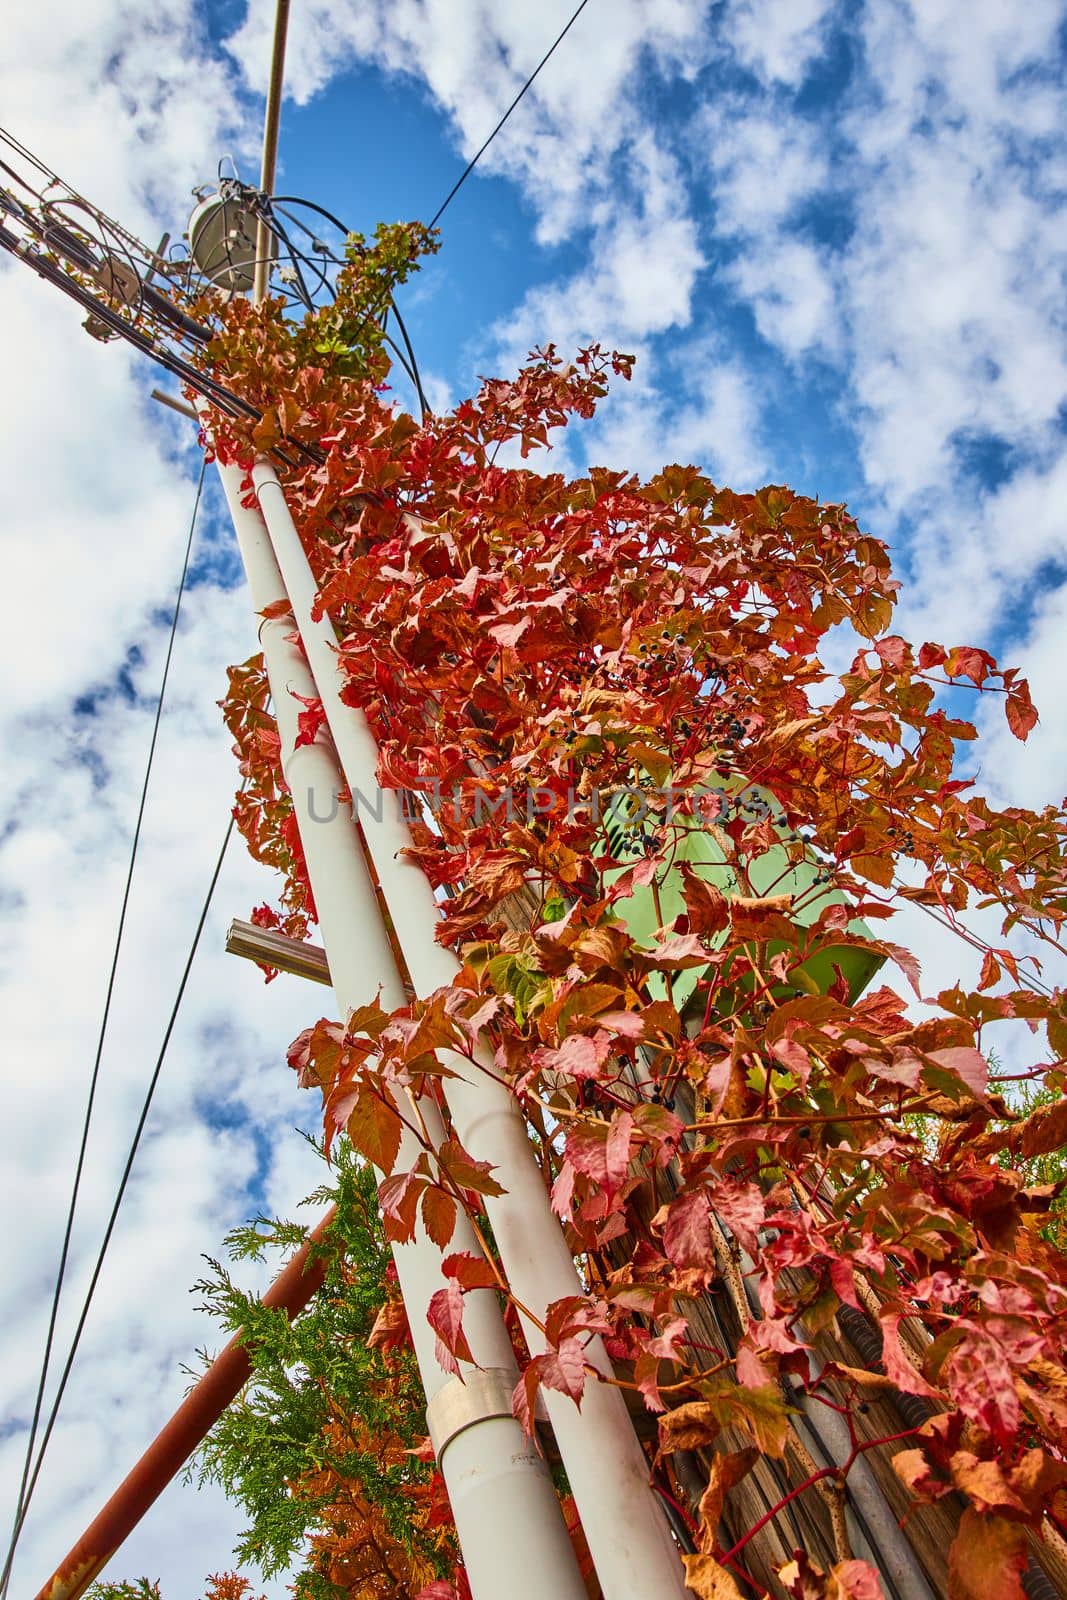 Image of Red vines grow up and take over wood telephone pole viewed from below